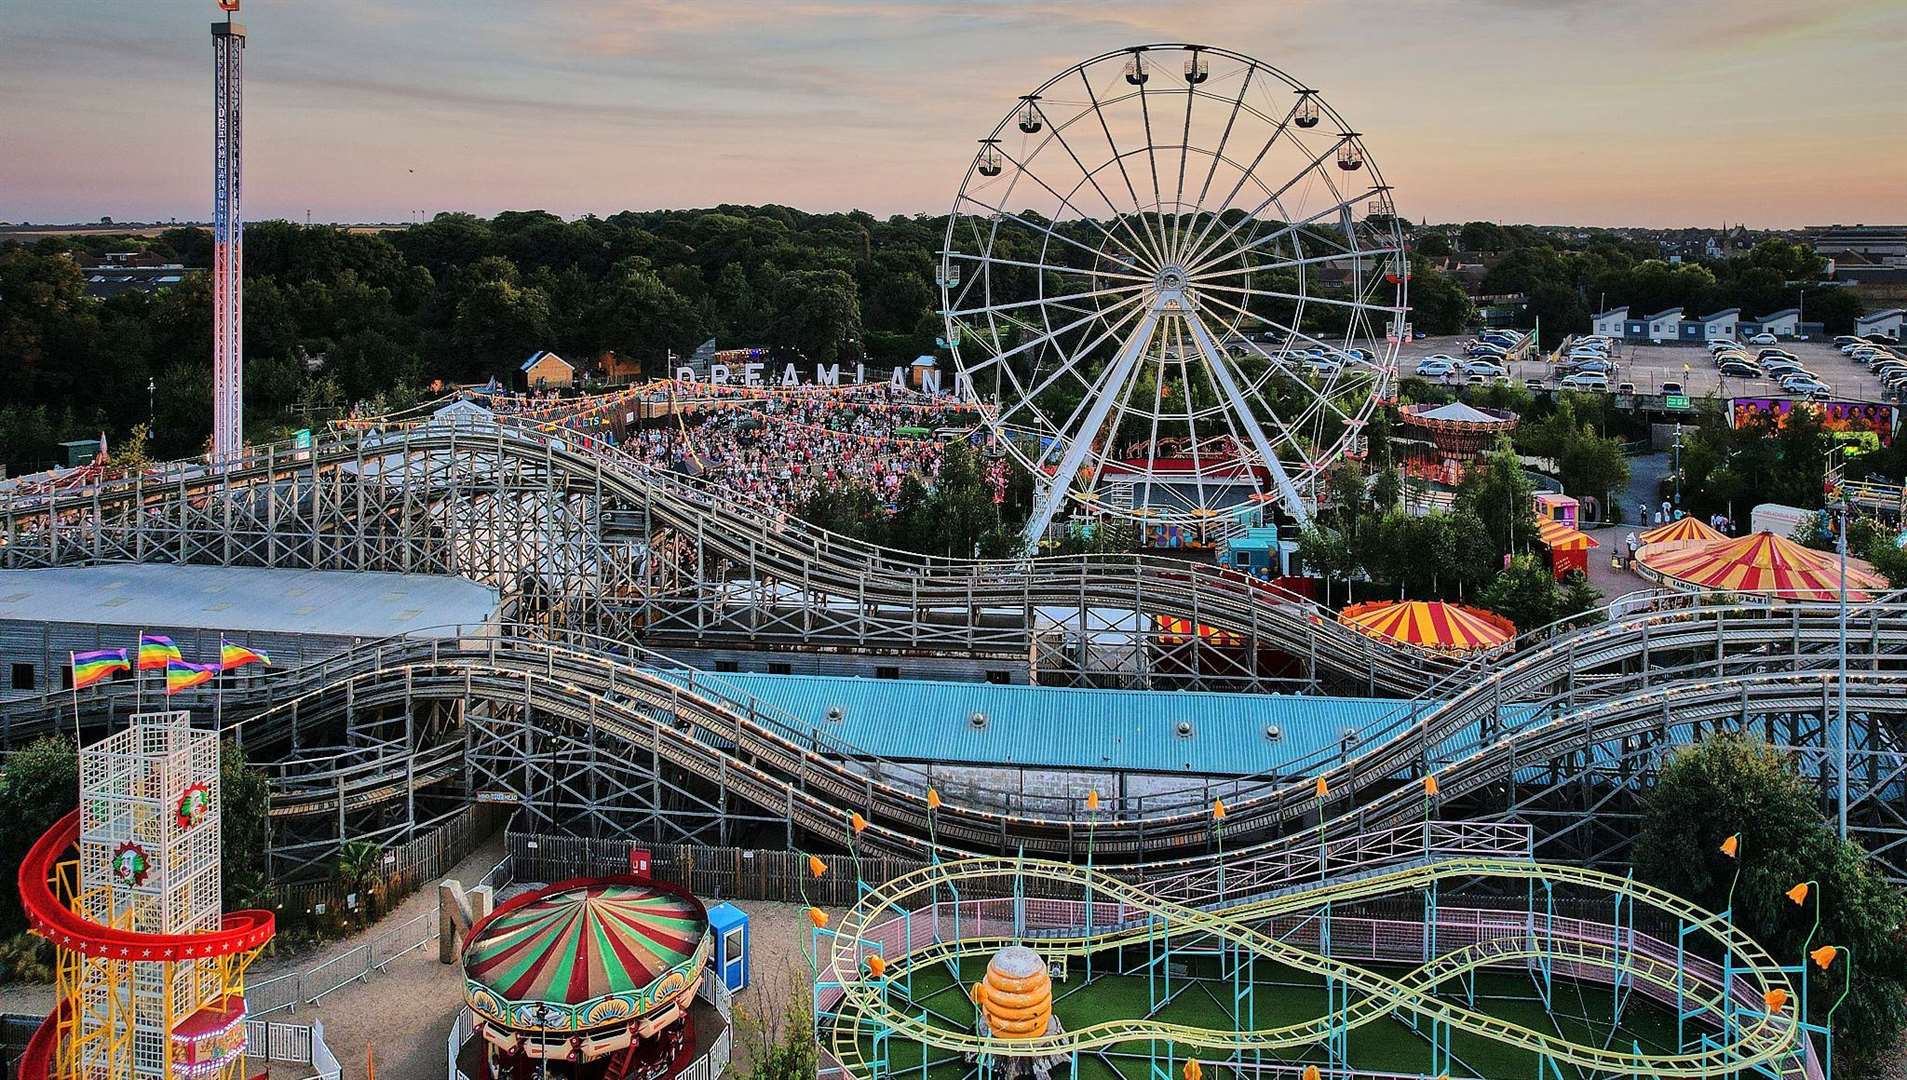 Dreamland is one of Thanet’s top attractions. Picture: Dreamland